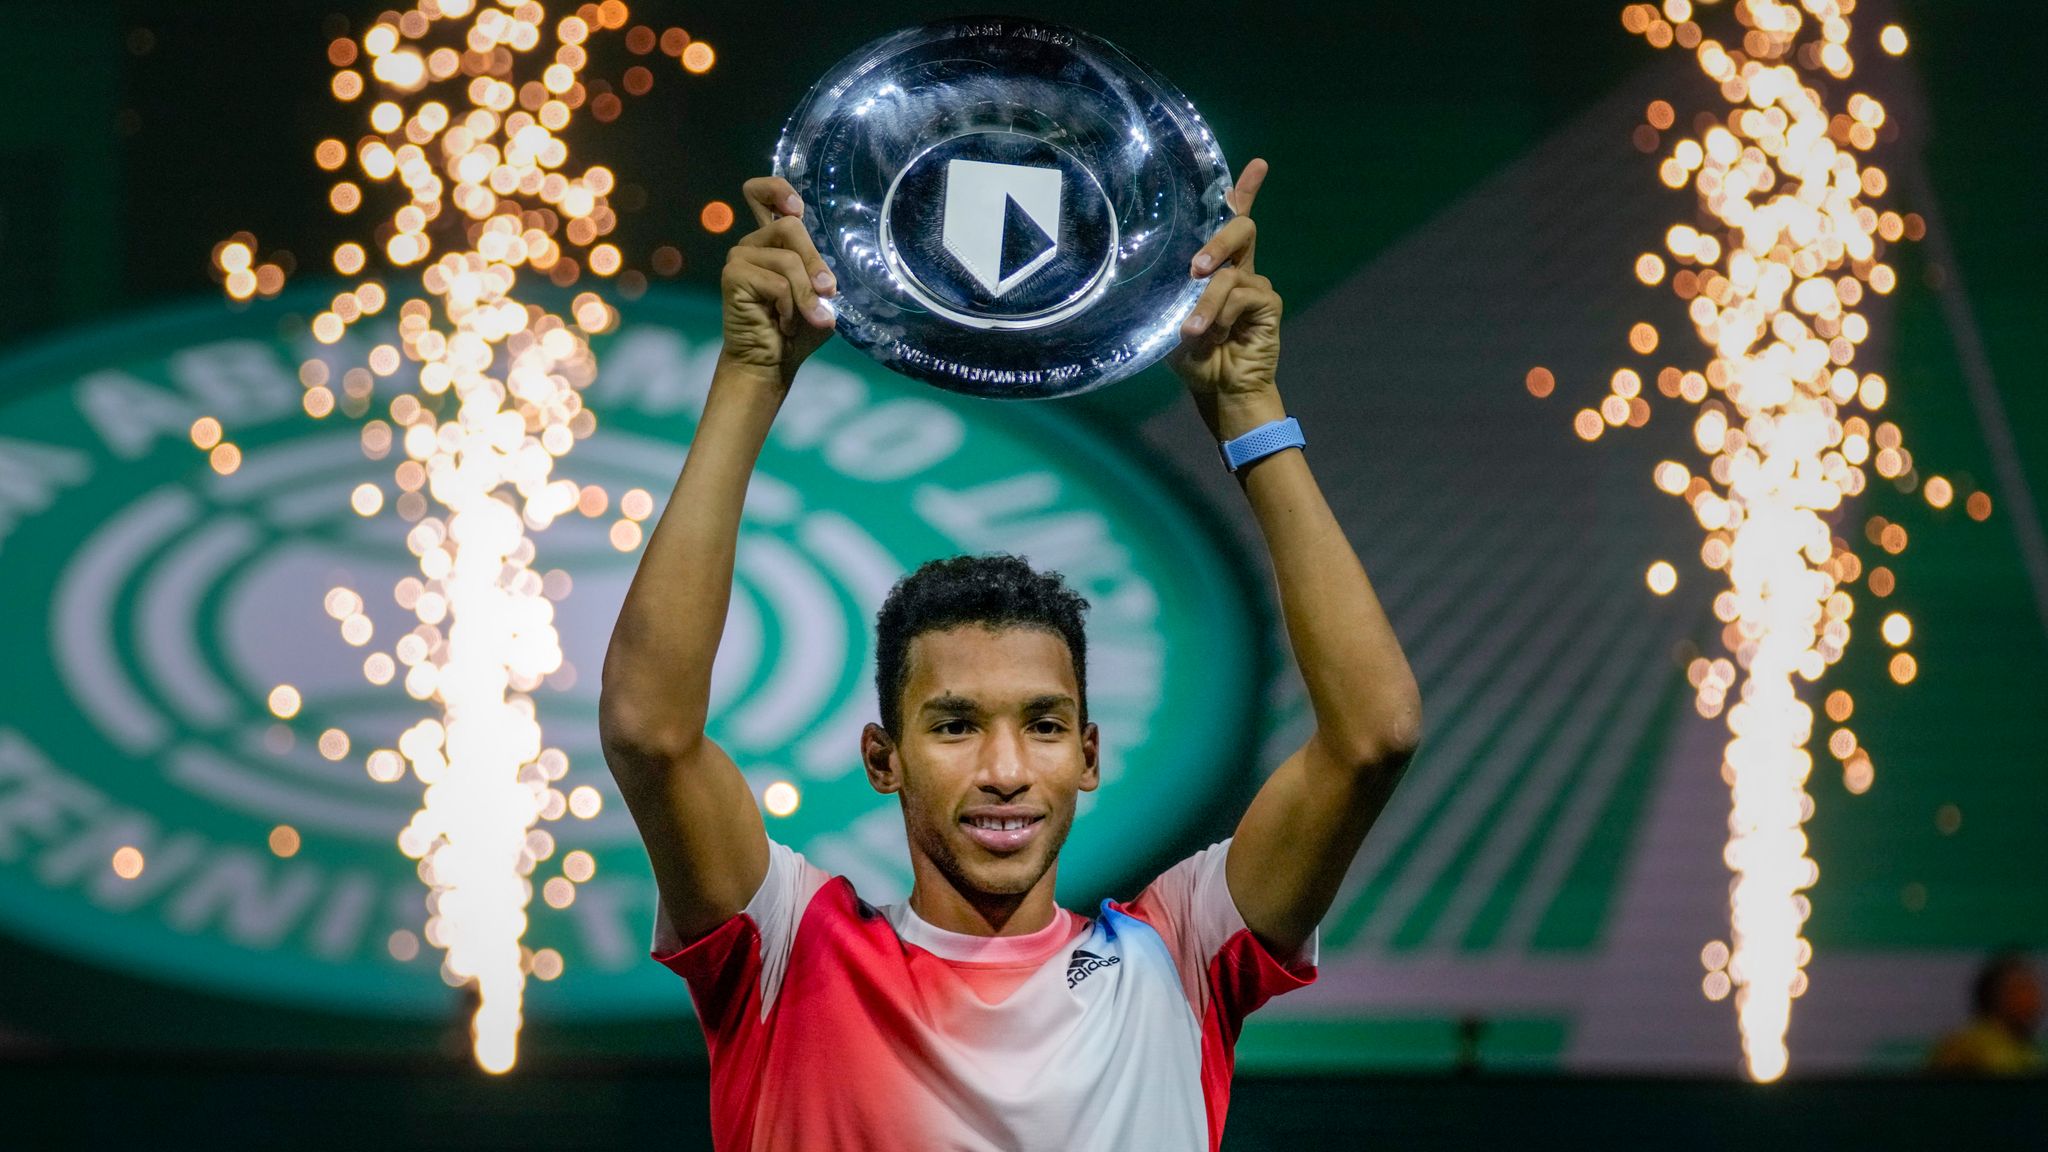 Felix Auger-Aliassime ends run of final defeats to claim maiden ATP Tour title in Rotterdam Tennis News Sky Sports